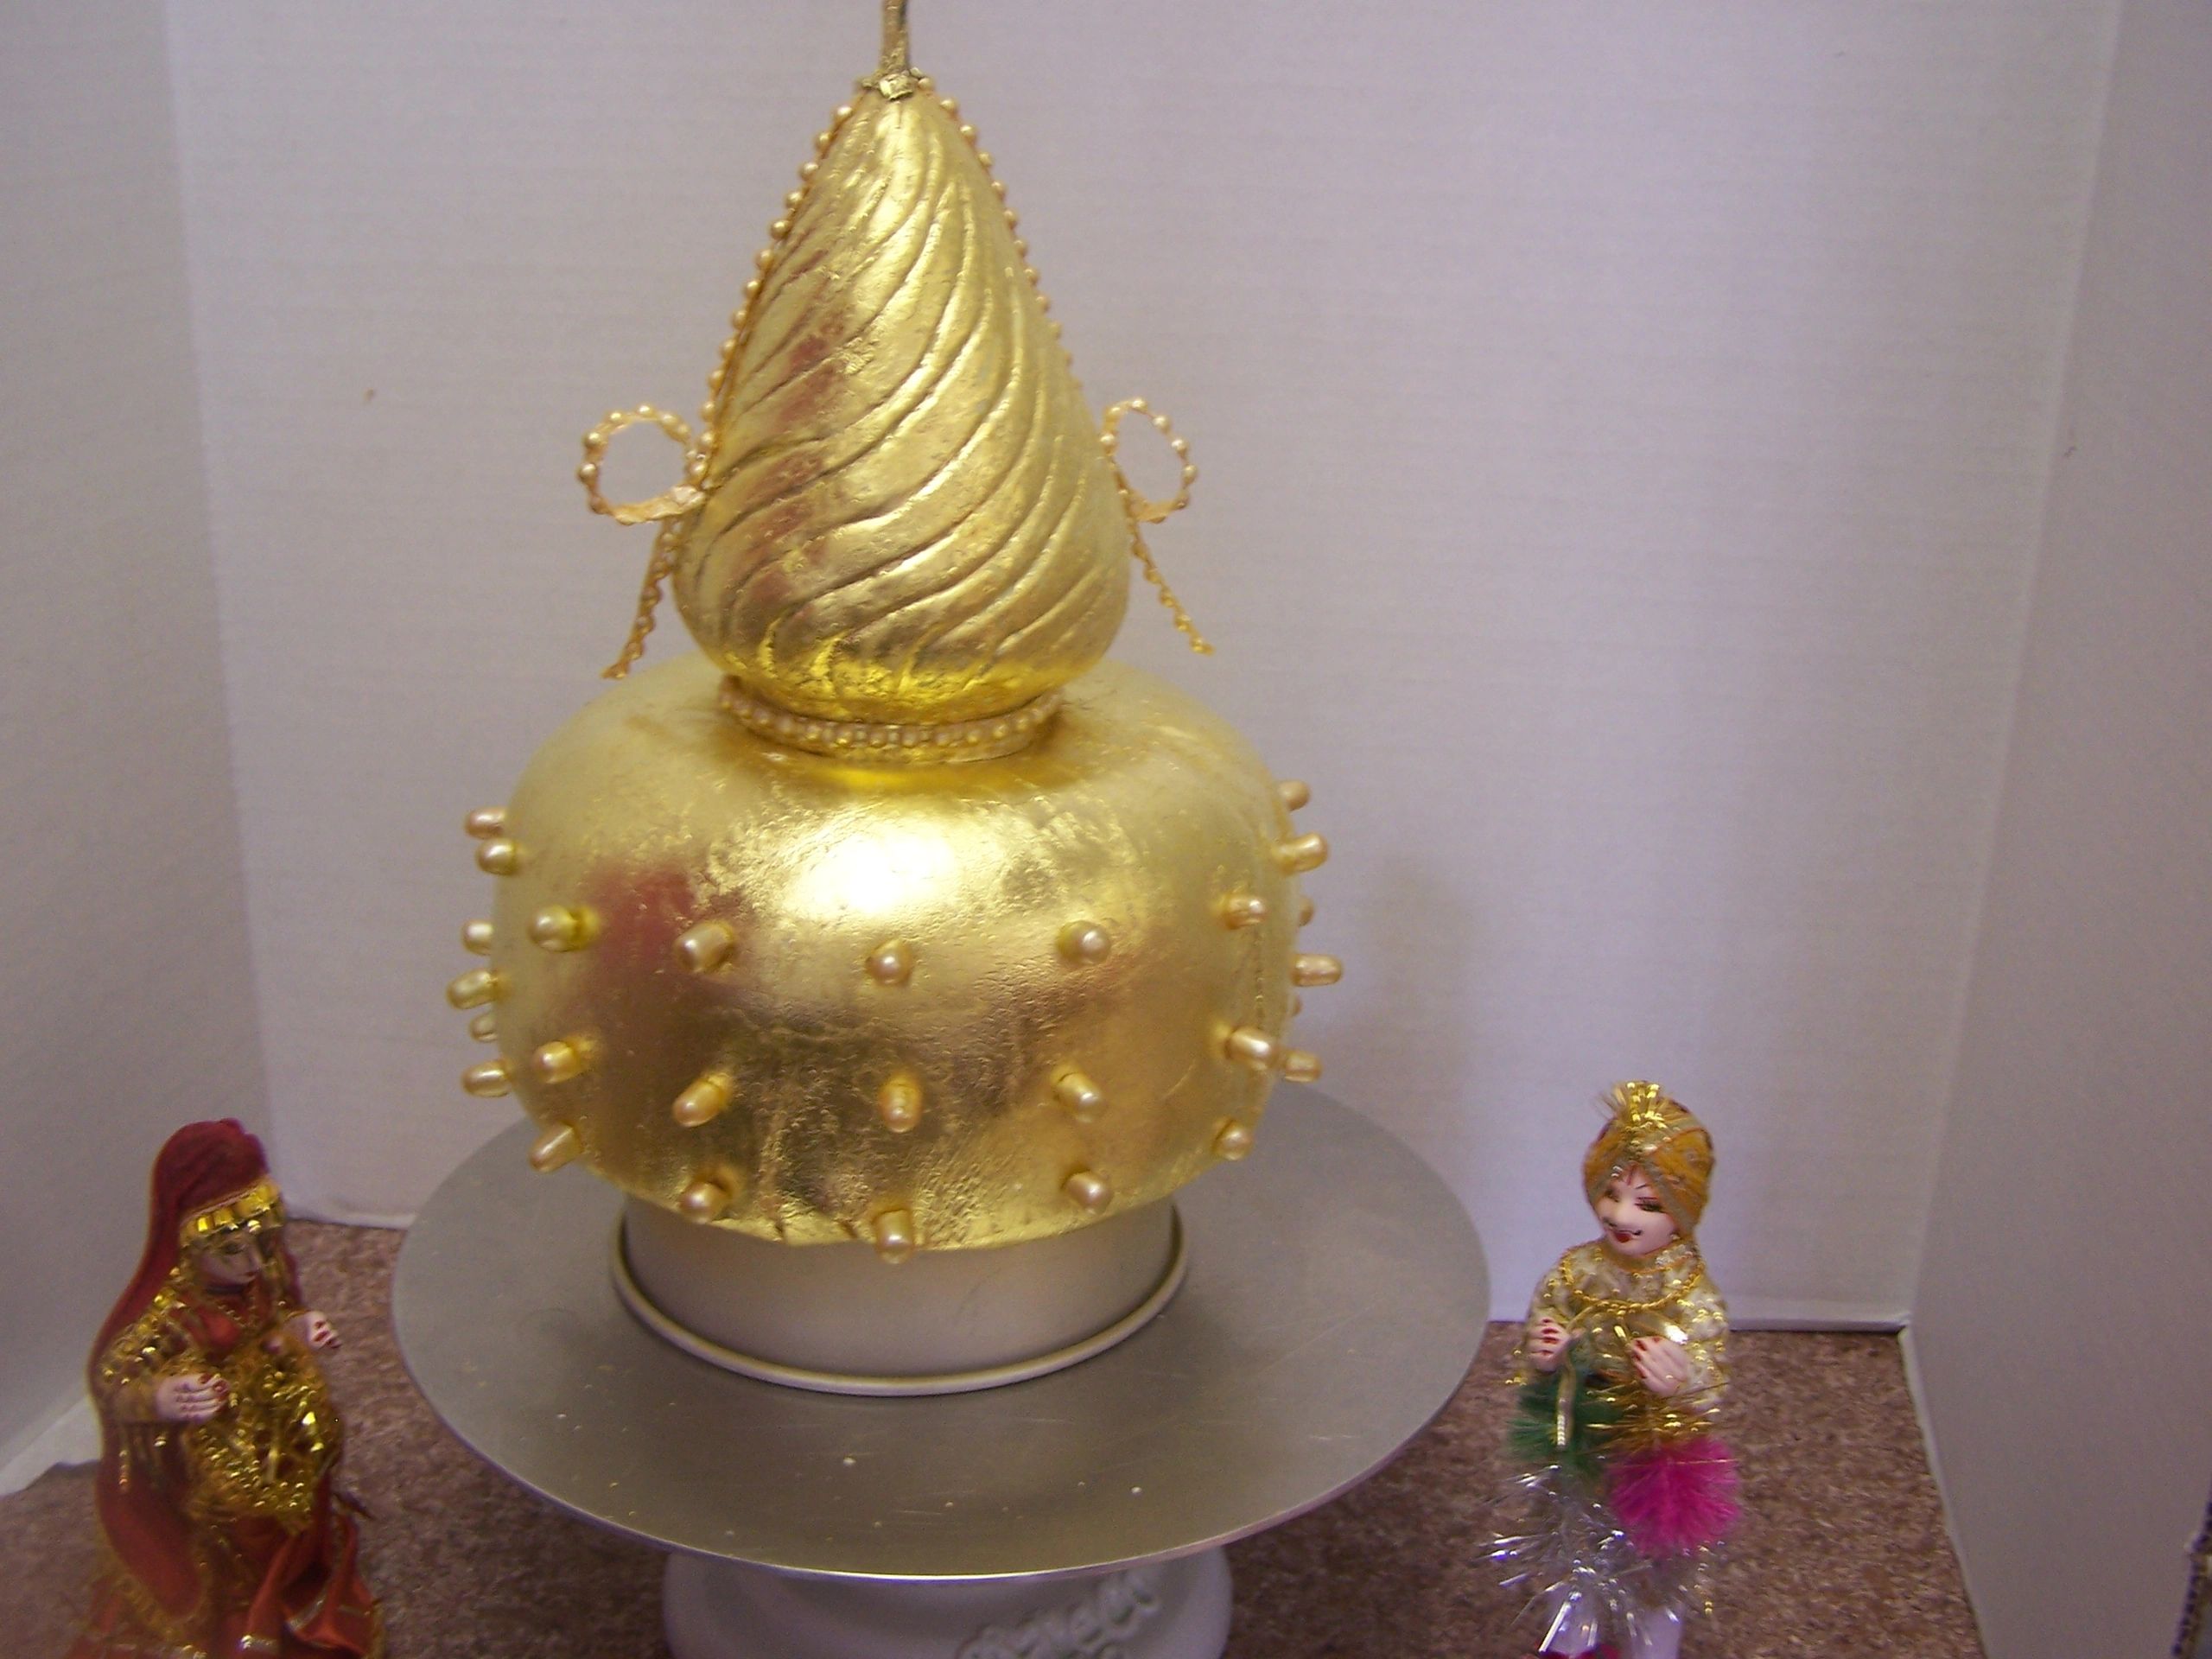 Close up of gold topper on Indian Wedding Cake.